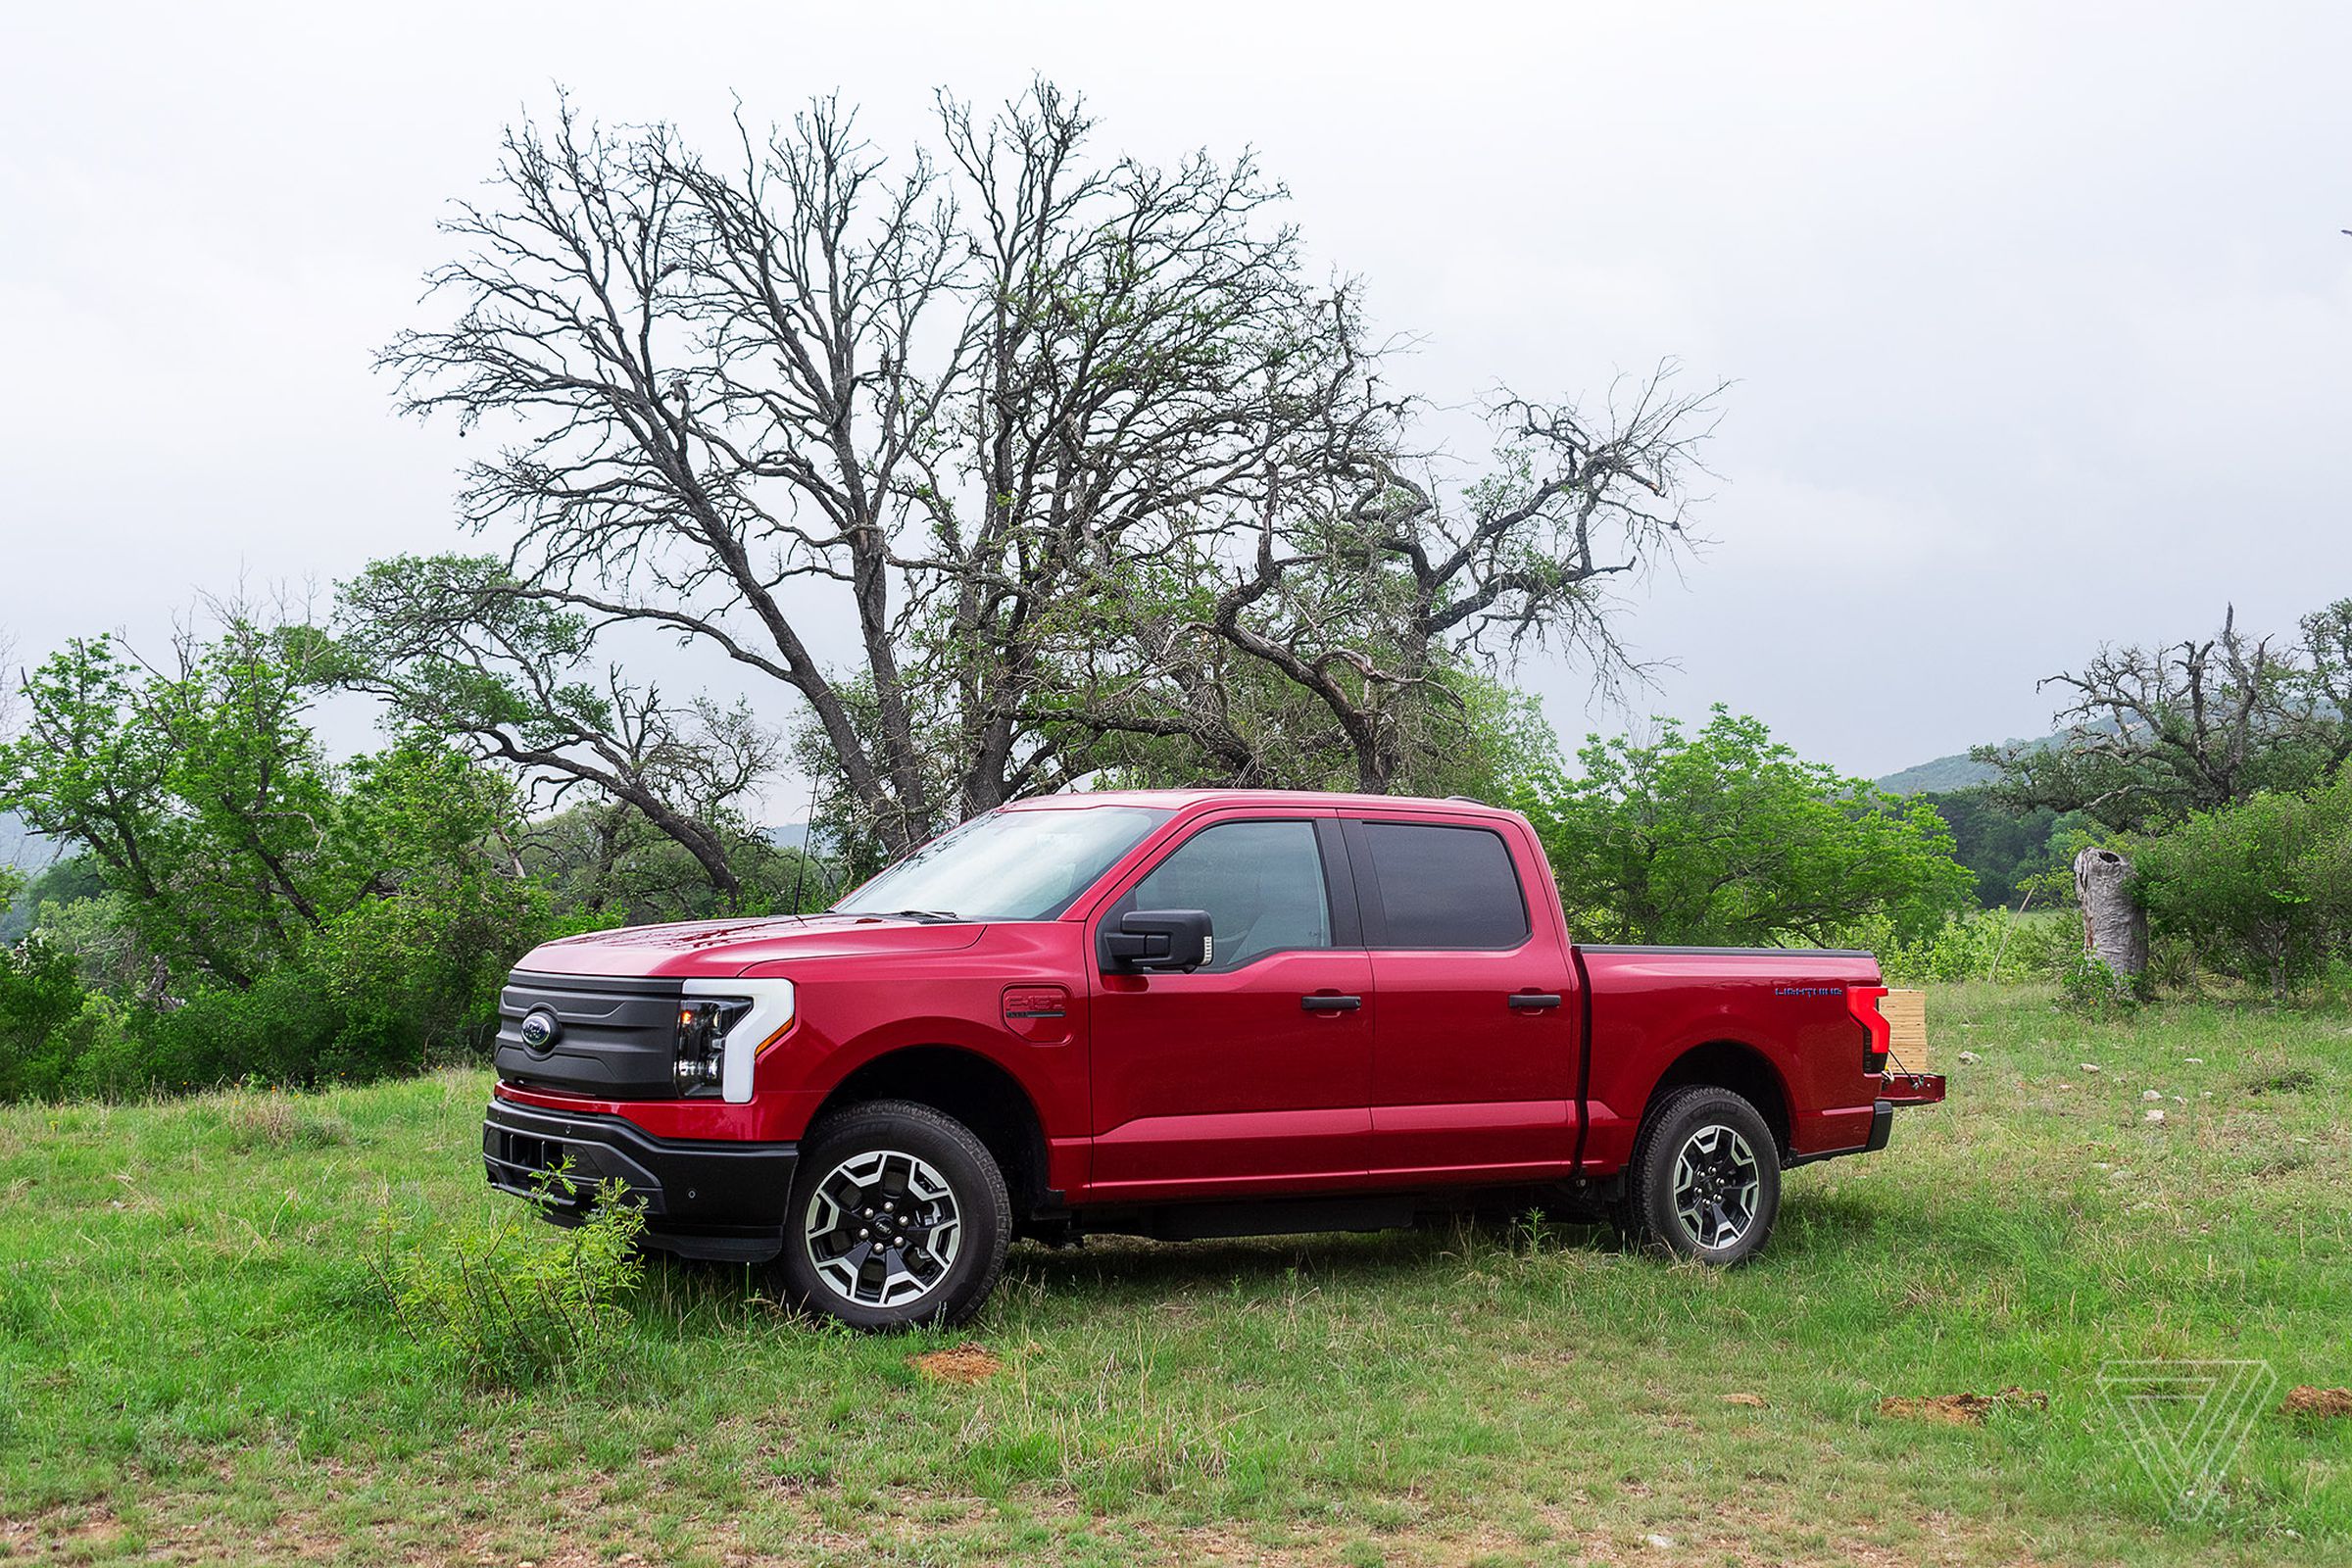 Ford F-150 Lightning electric truck in a field